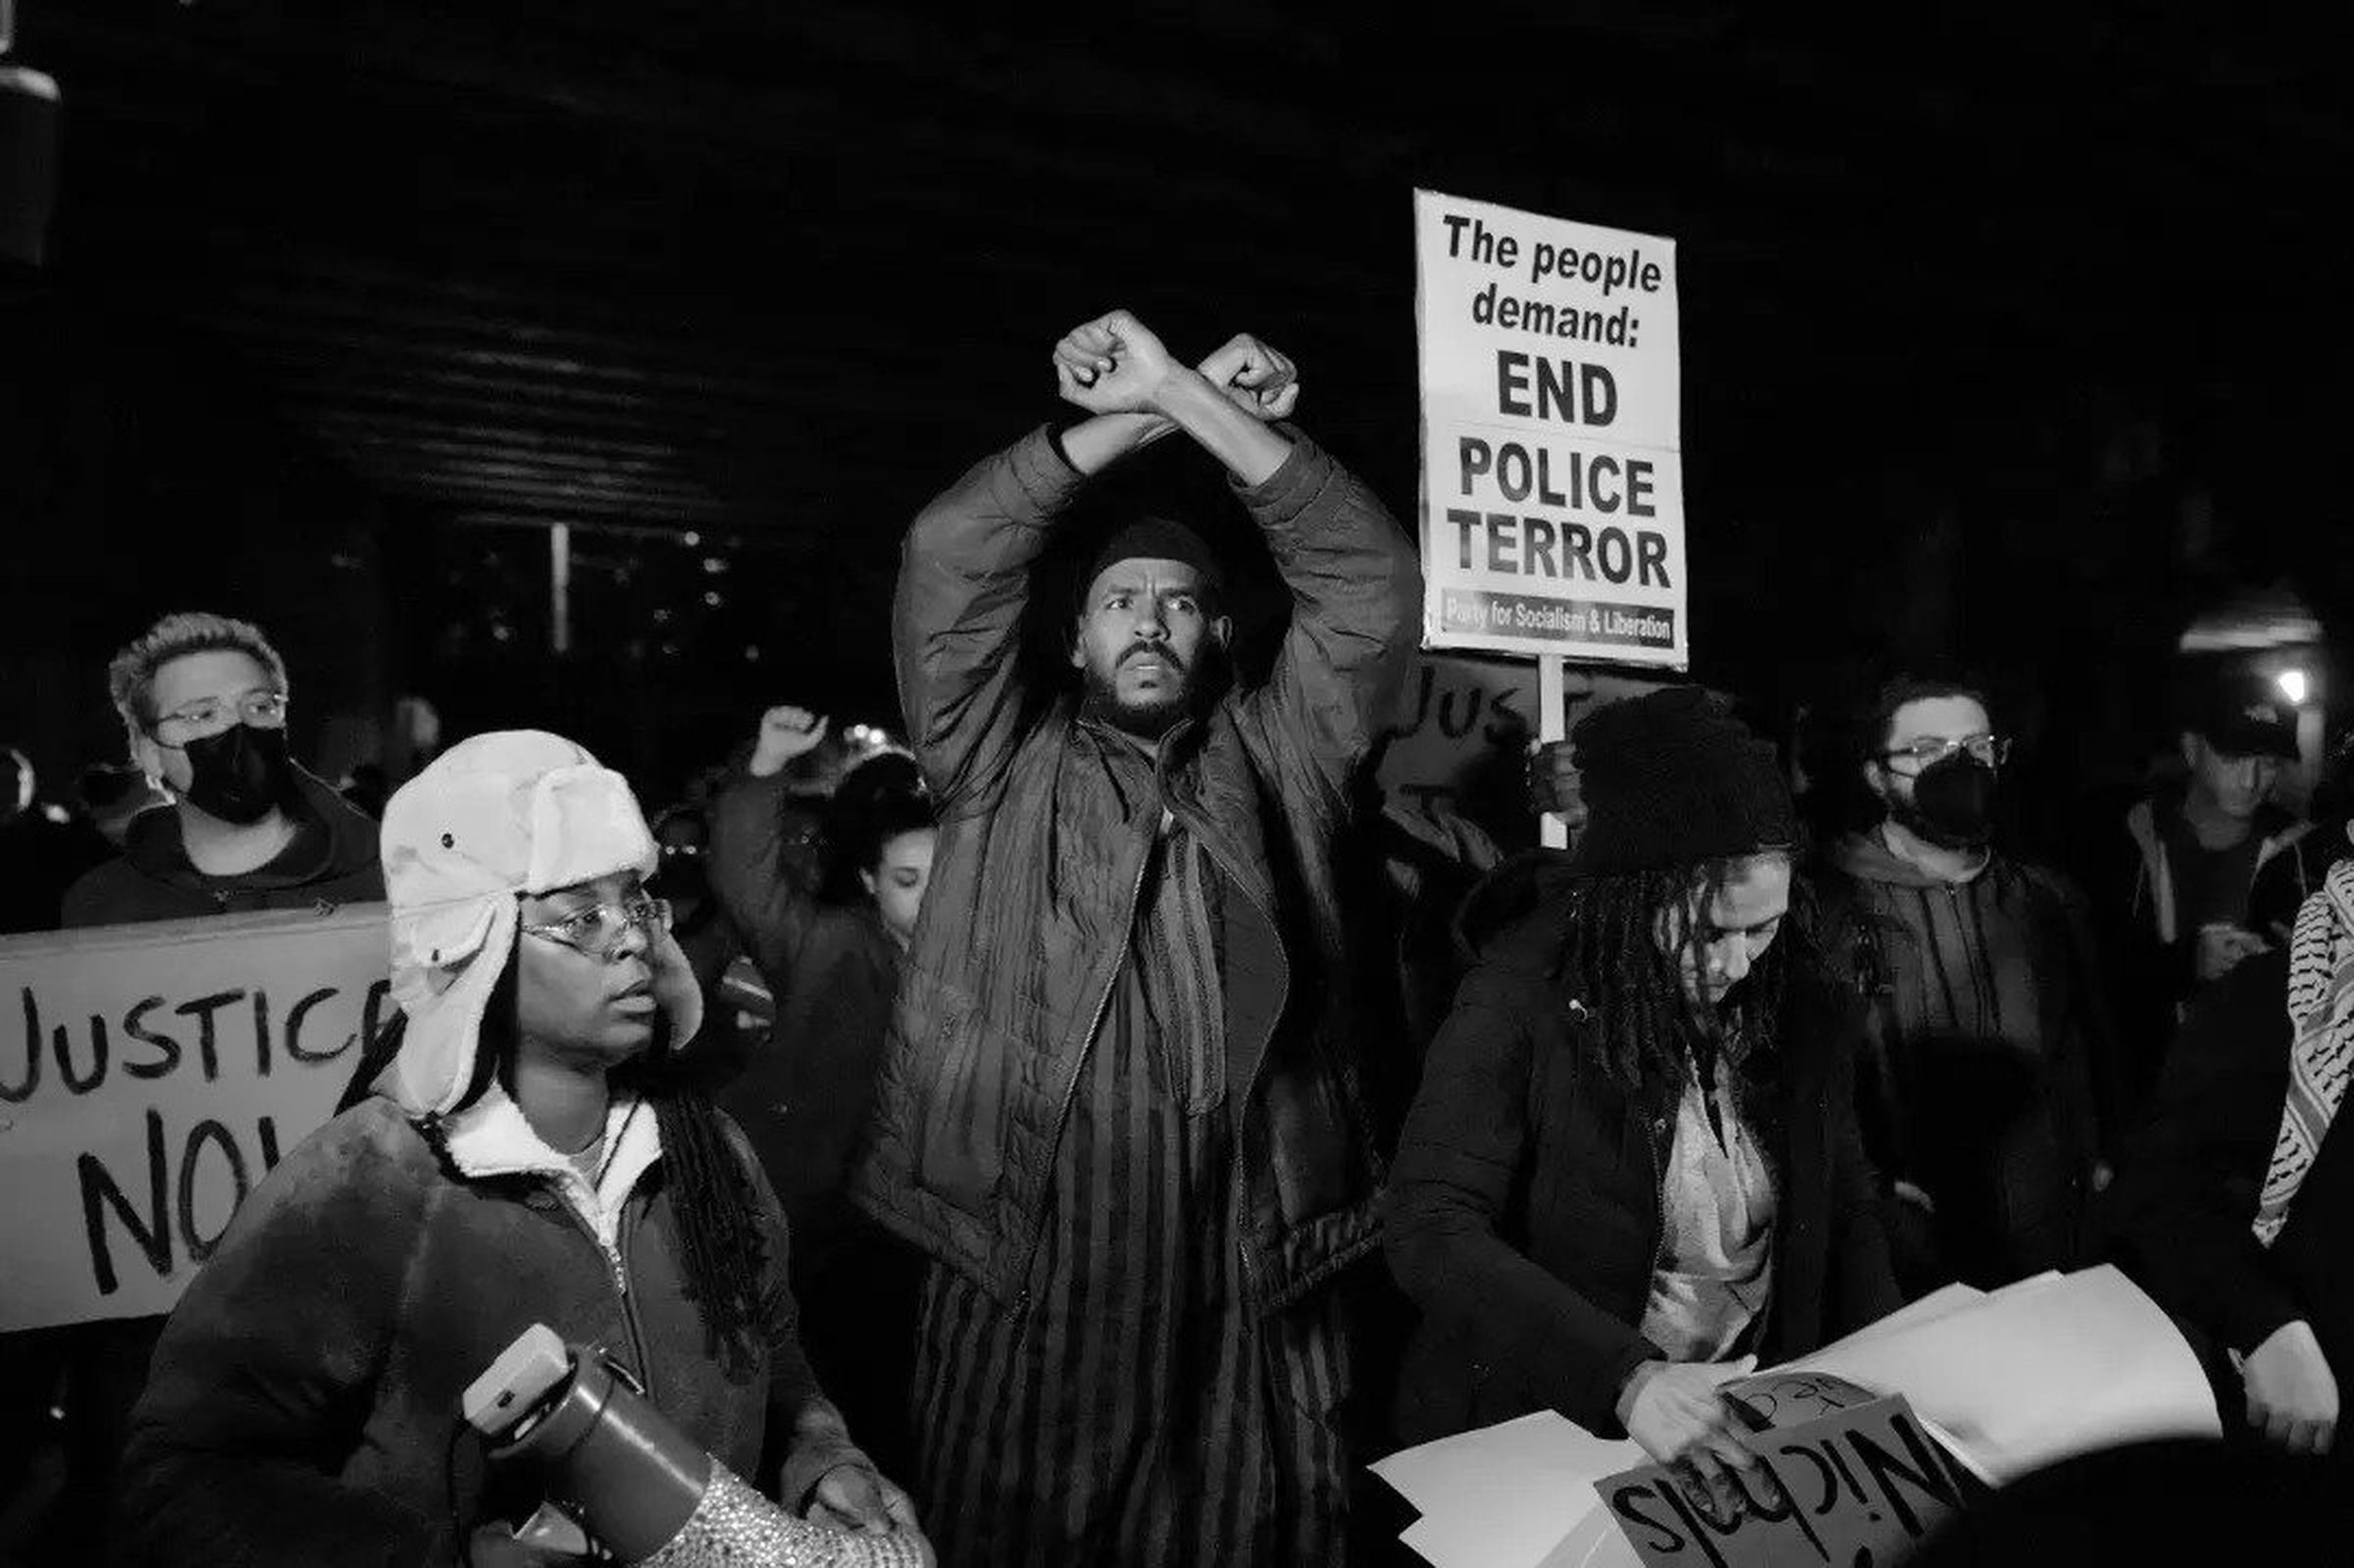 A group of protesters at a road block in Memphis, Tennessee.